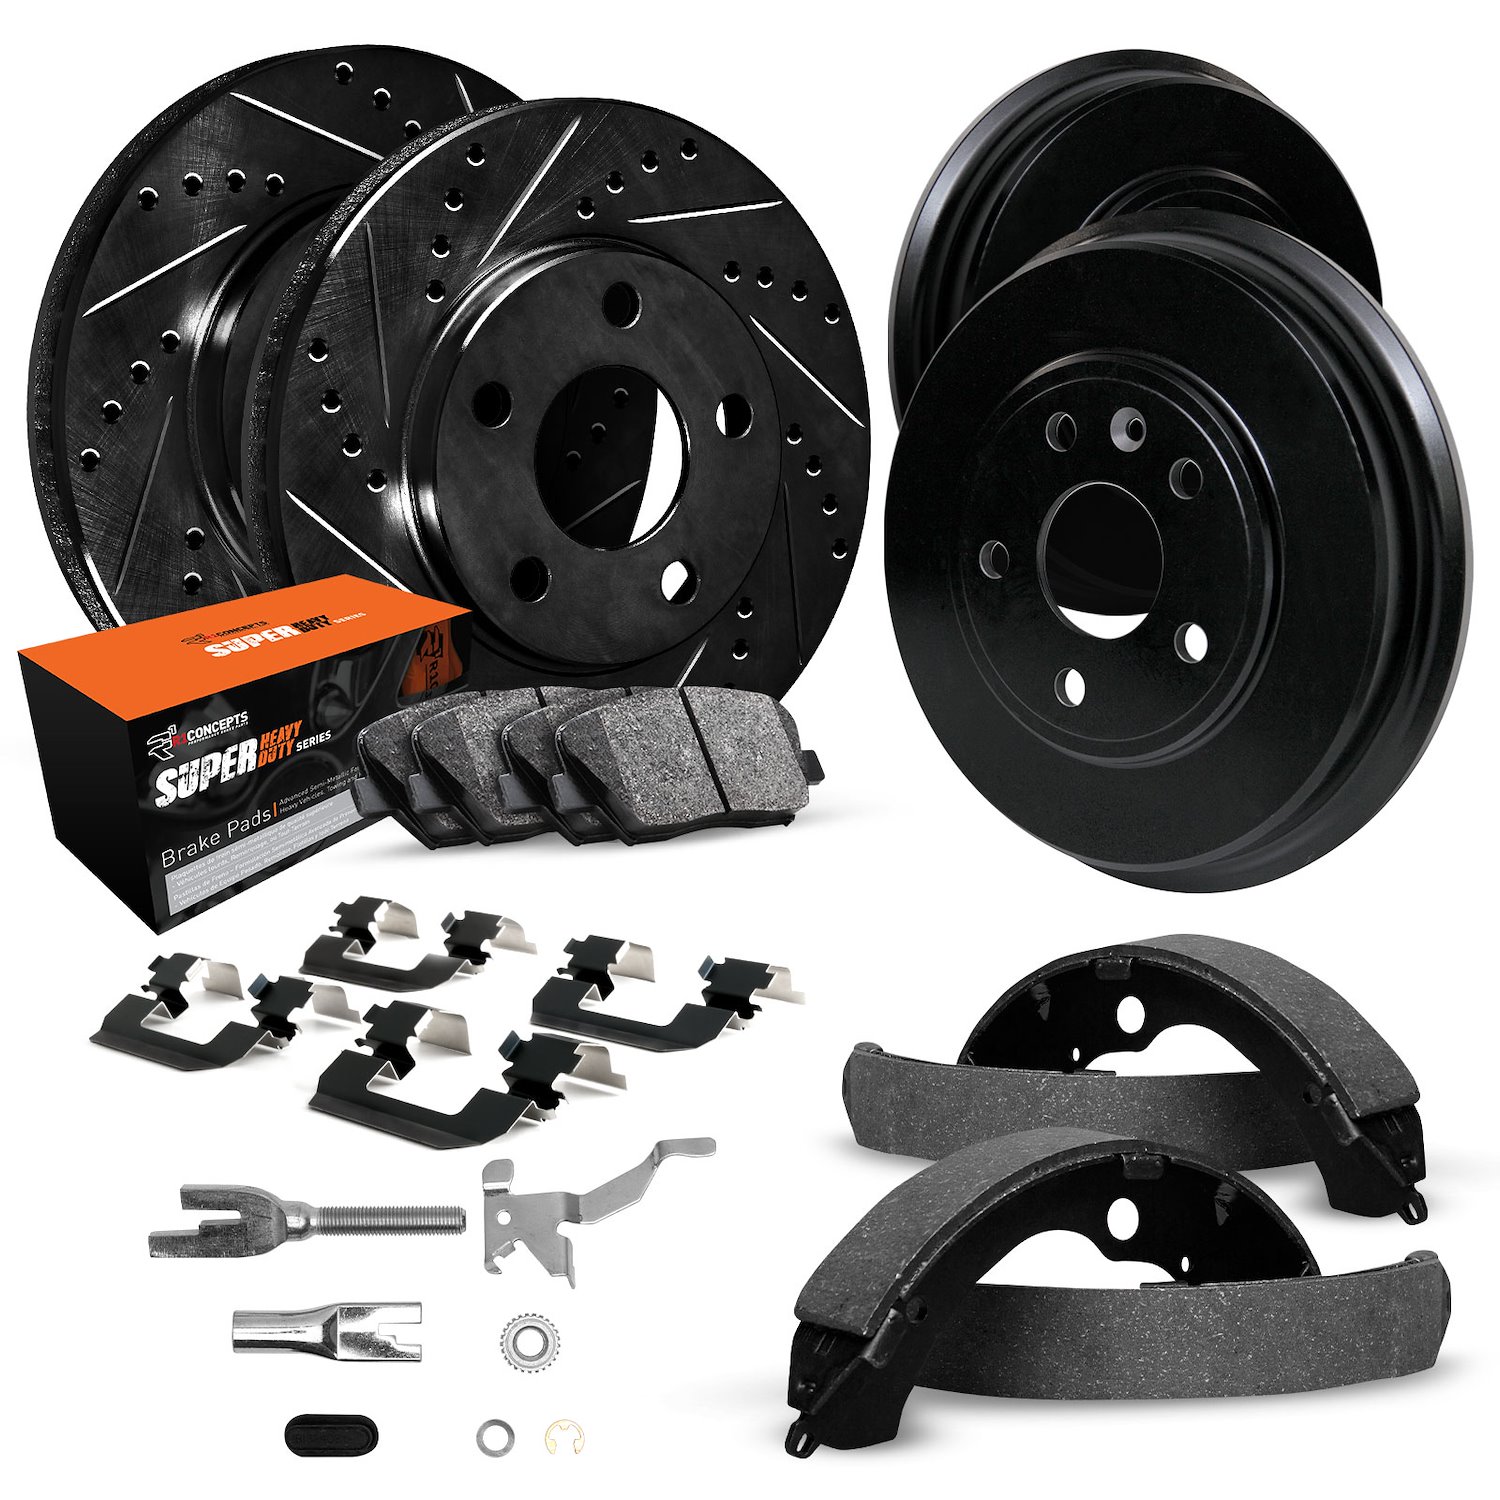 E-Line Drilled/Slotted Black Rotor & Drum Set w/Super-Duty Pads, Shoes, Hardware/Adjusters, 1997-2002 Ford/Lincoln/Mercury/Mazda